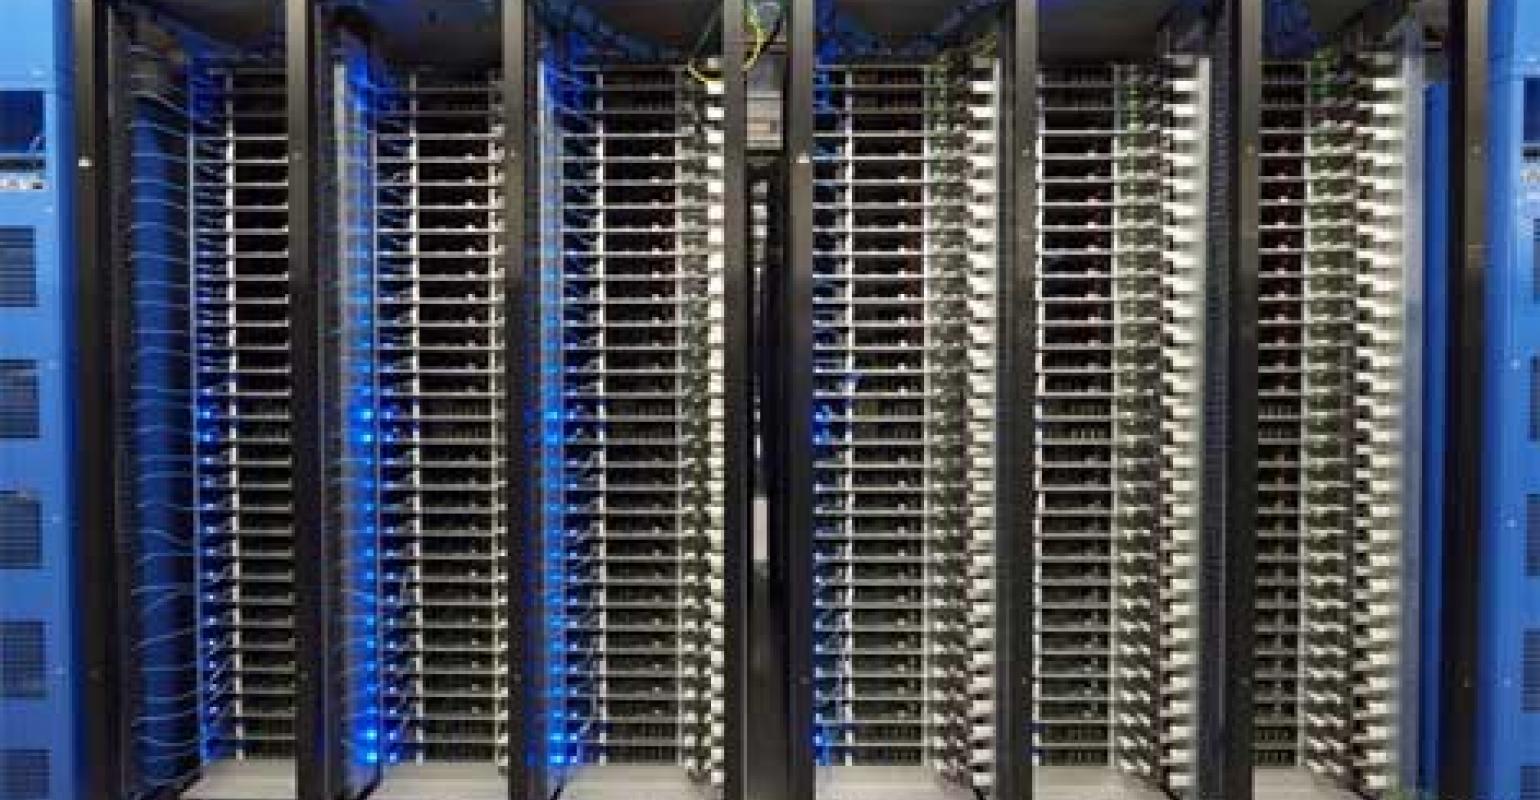 How Many U In A Typical Server Rack